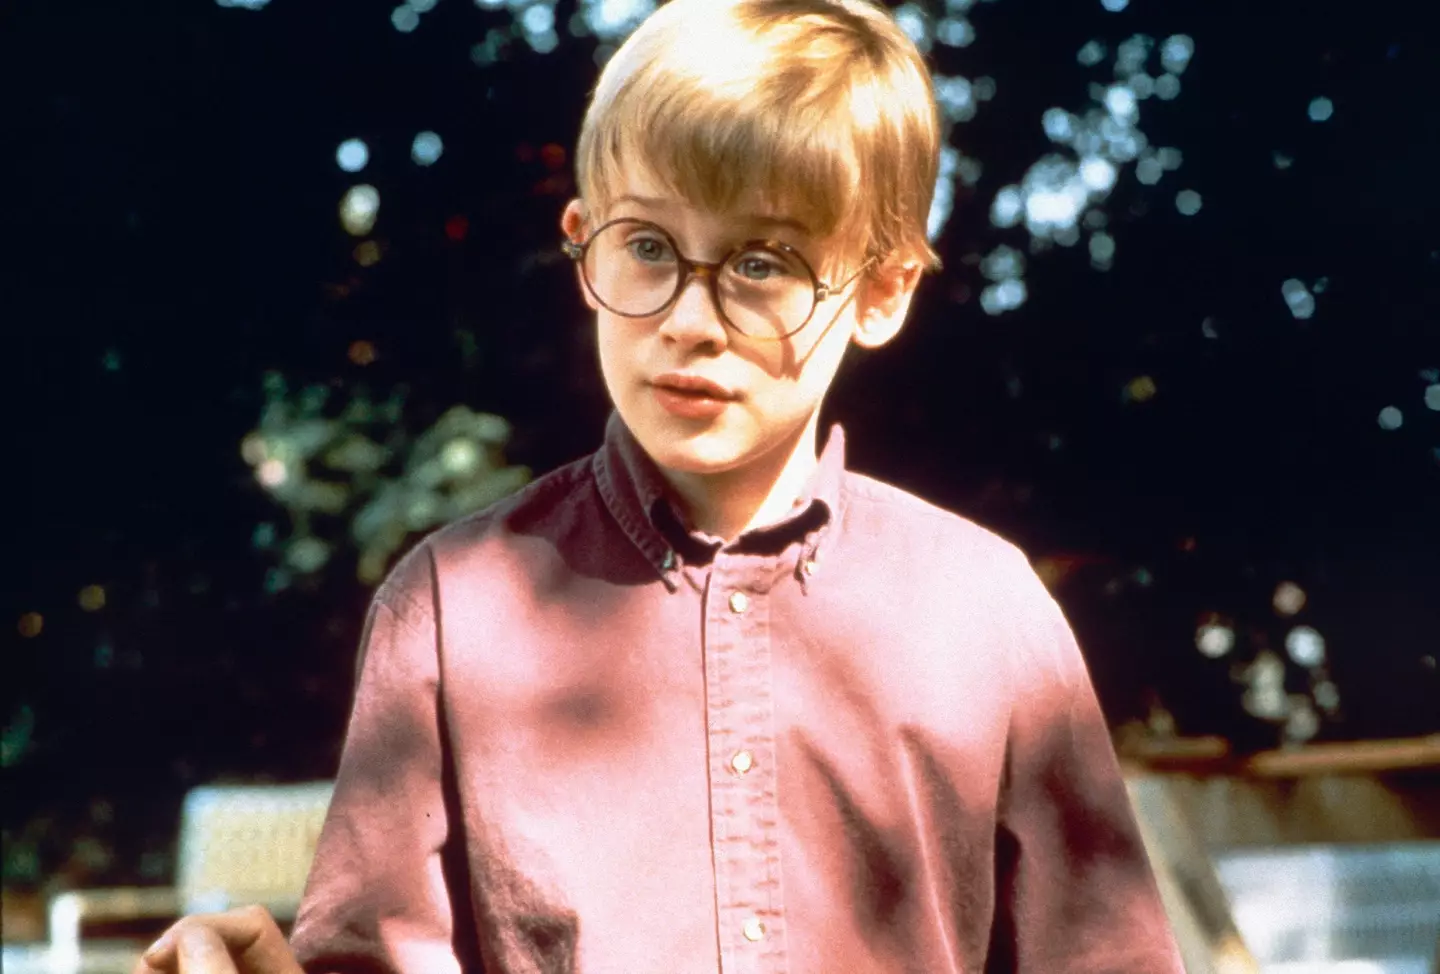 Kulkin was one of the biggest child stars of the 1990s.